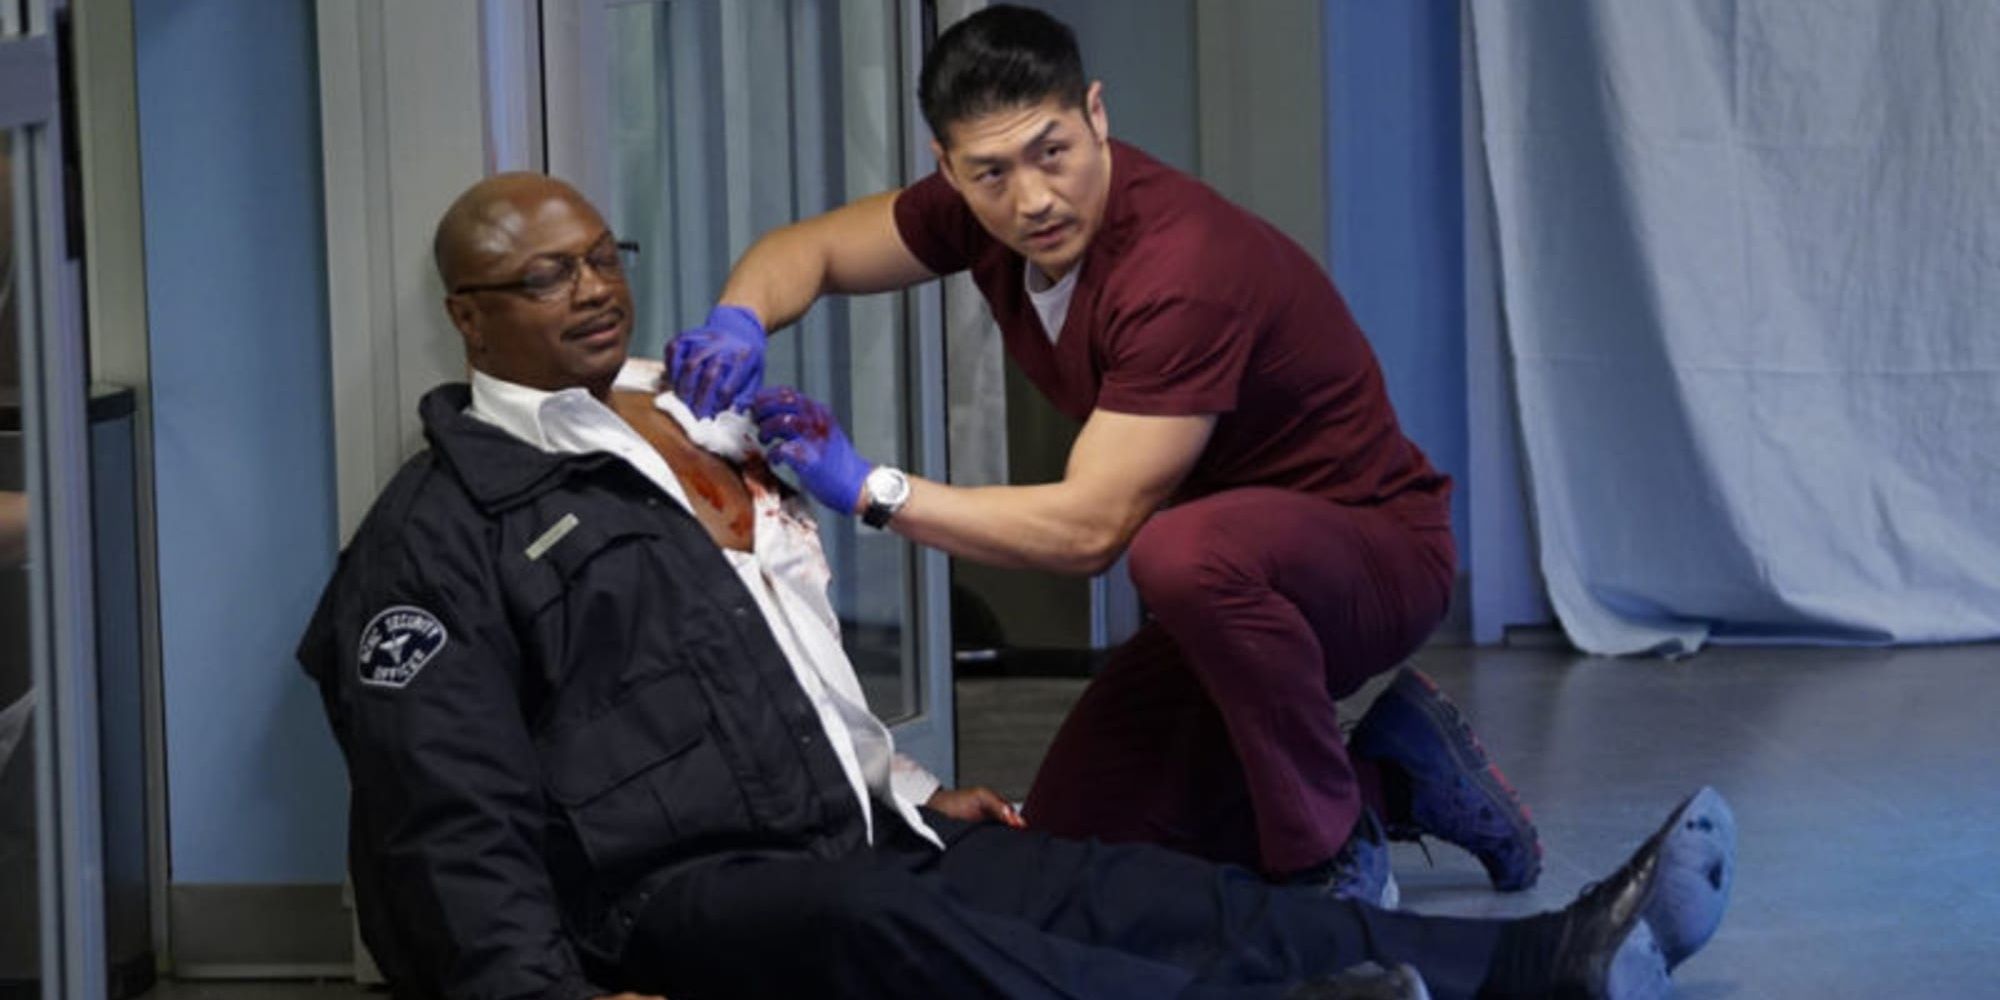 A security guard receives treatment after trying to stop a gunman in Chicago Med